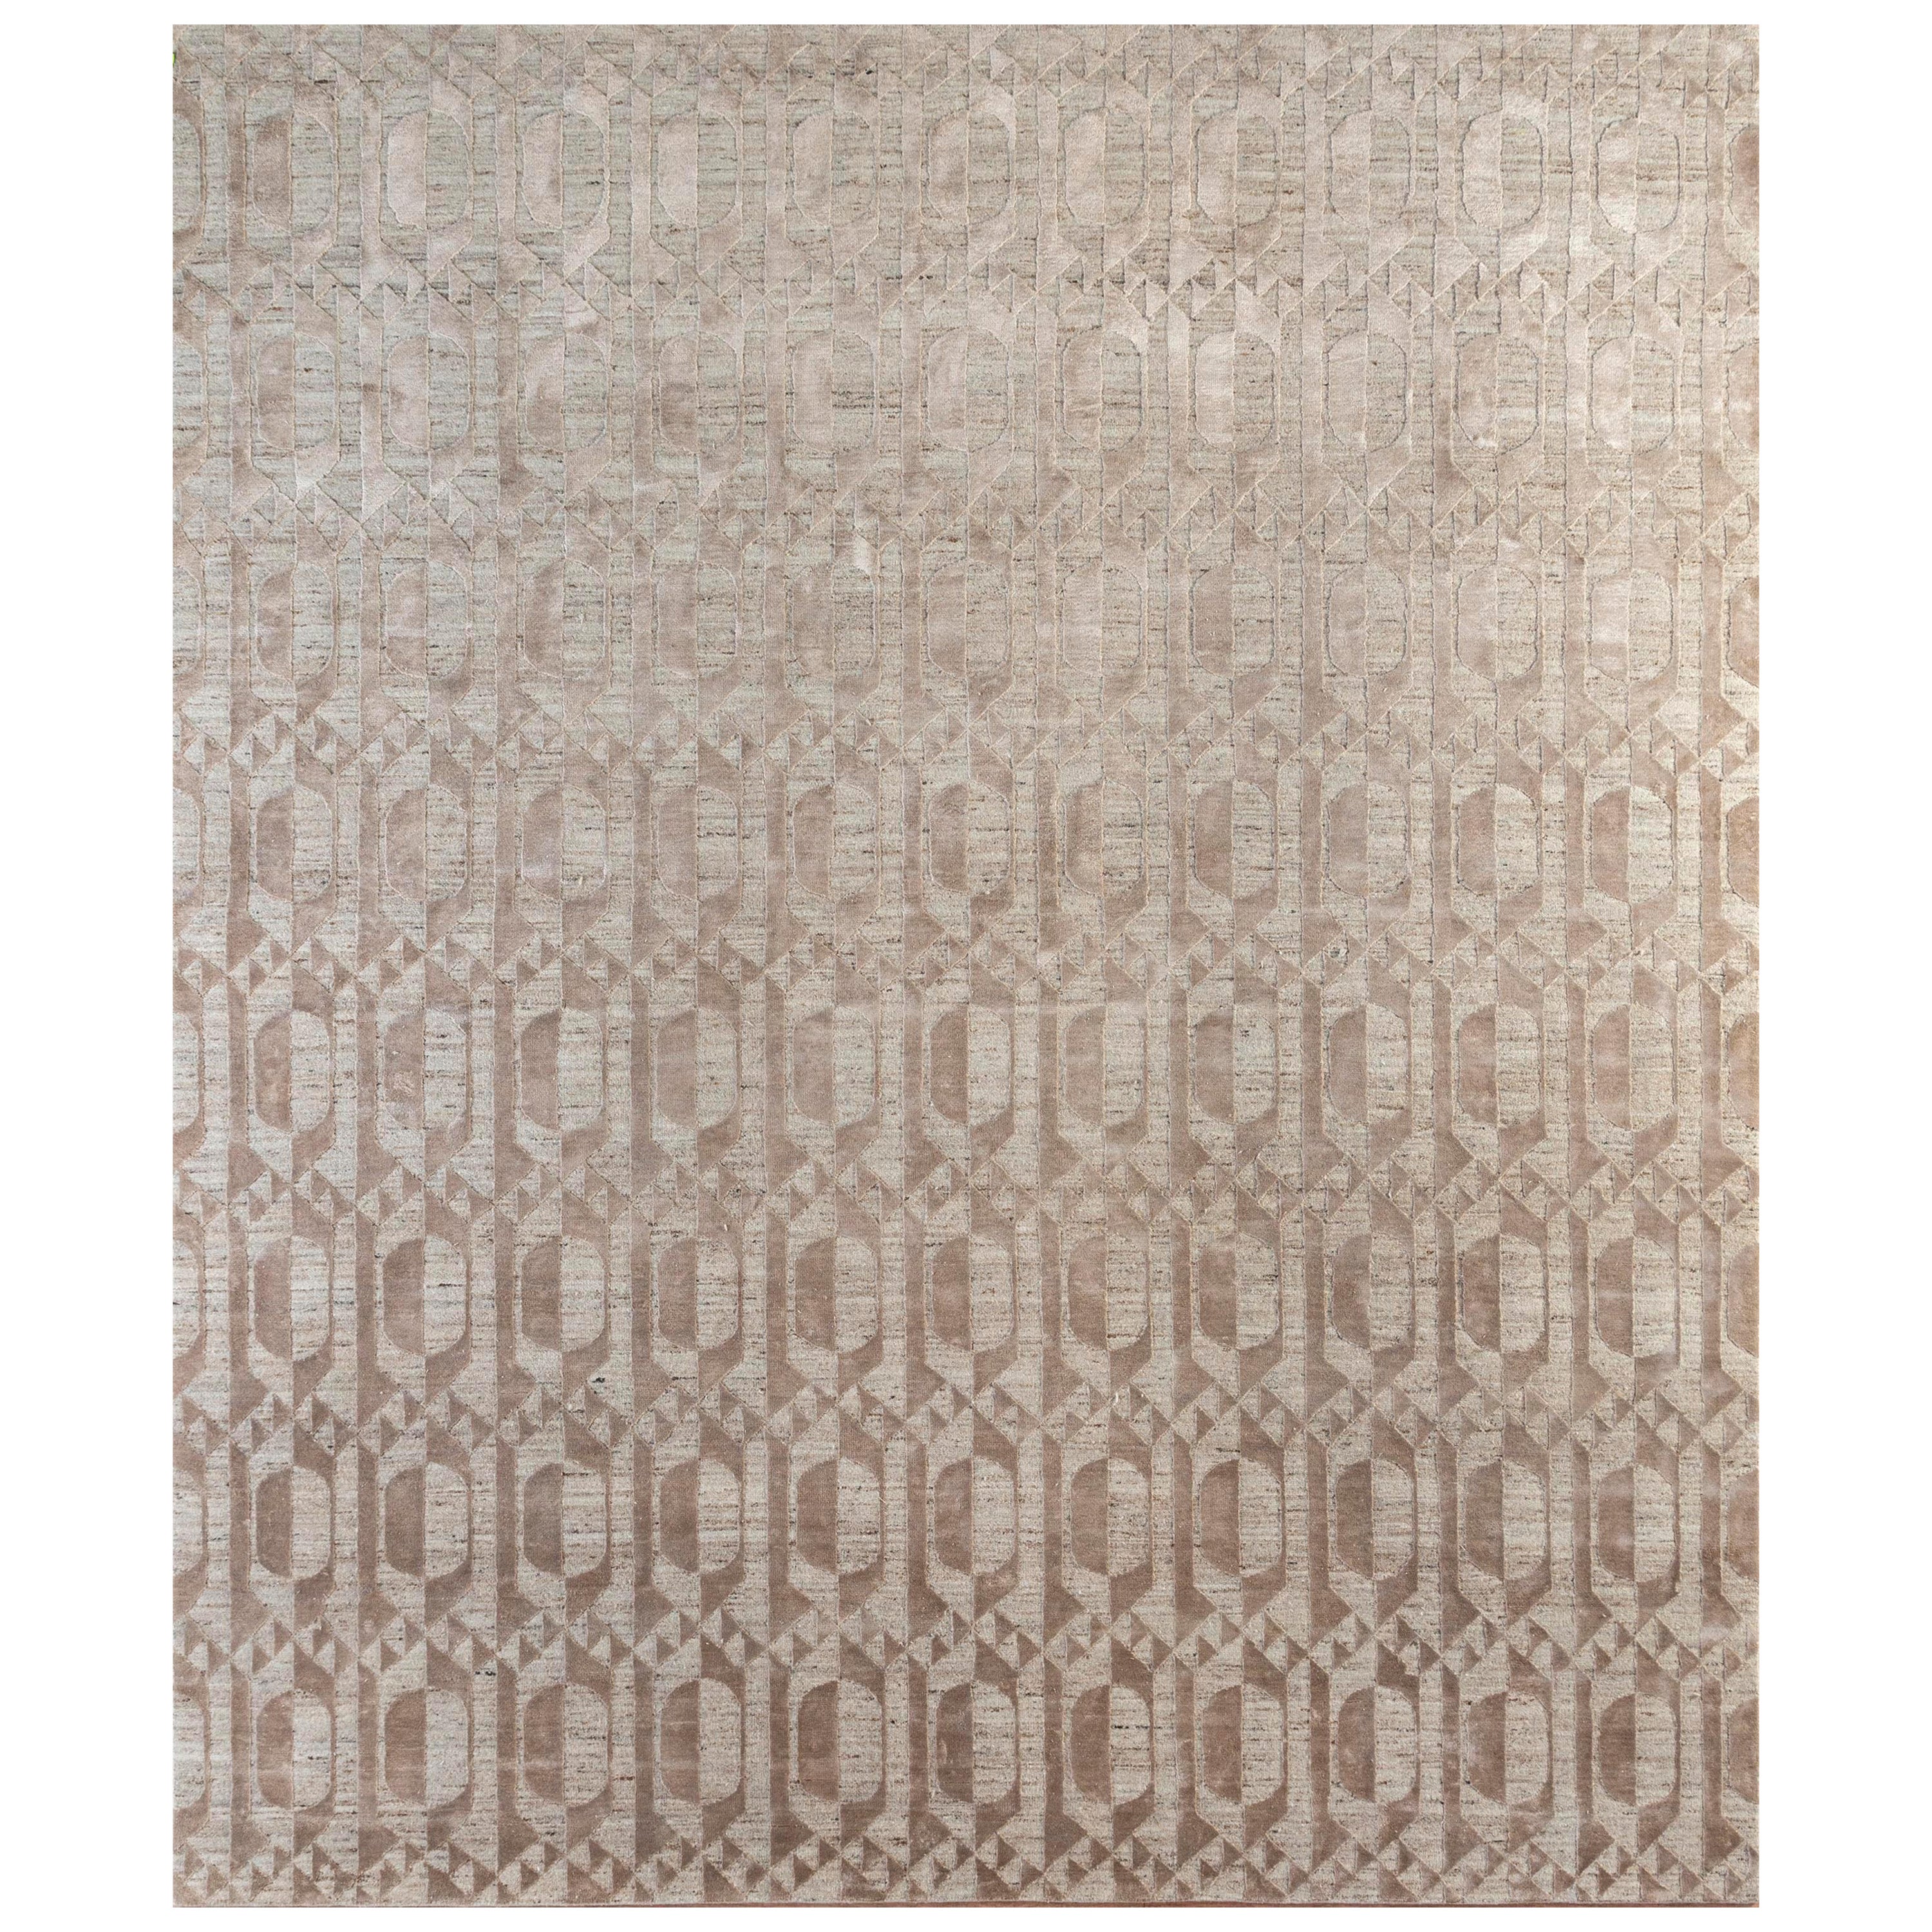 Mystic Labyrinth Warm Sesame & Natural Beige 240X300 cm Handknotted Rug For Sale